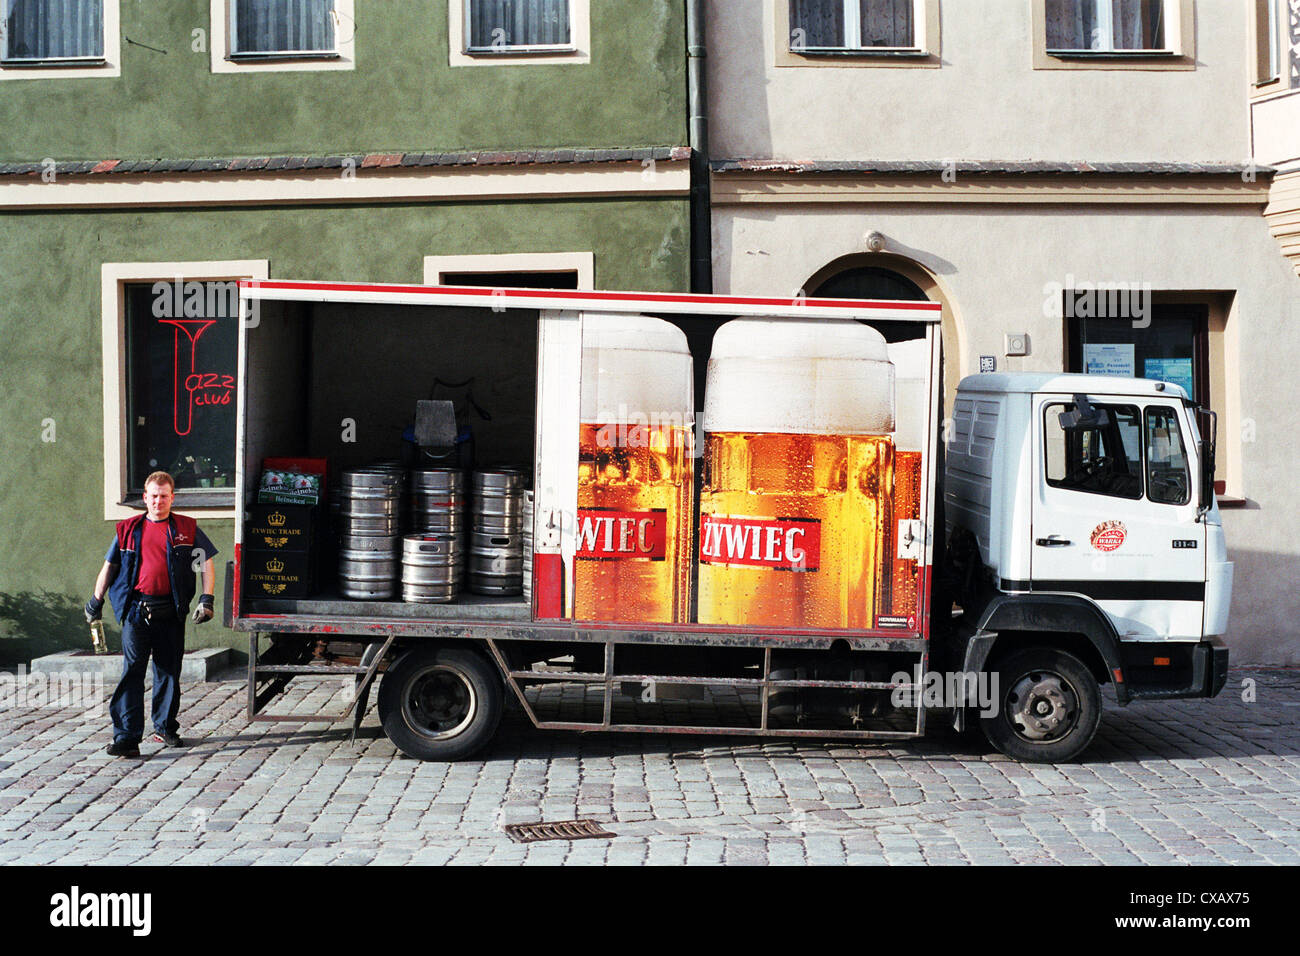 Vans of Zywiec beer brand in the heart of Poznan, Poland Stock Photo - Alamy